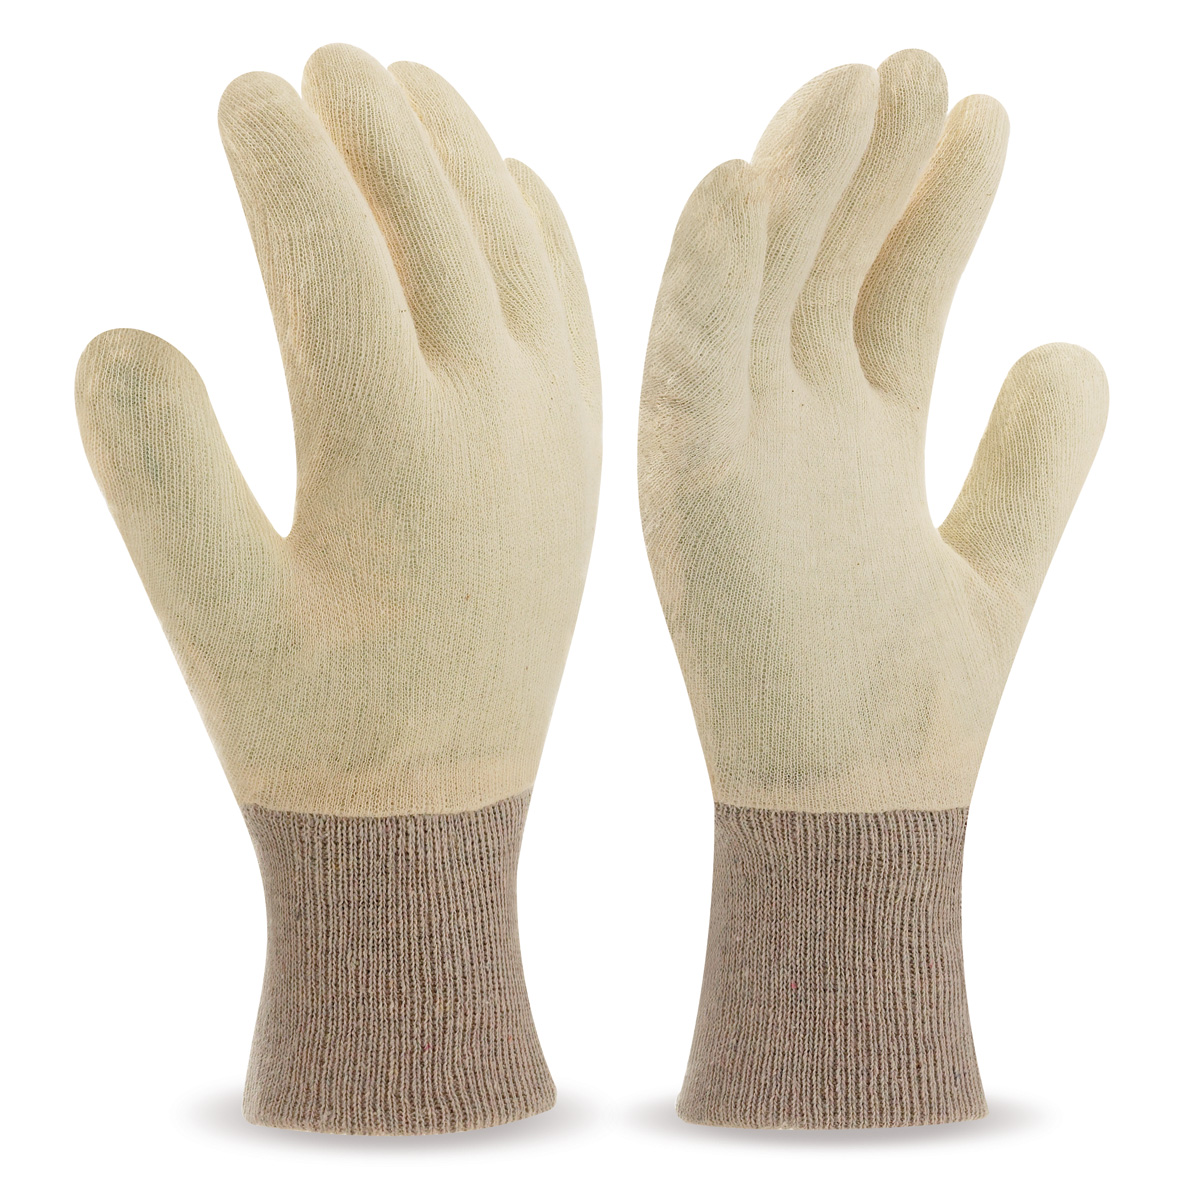 688-PF Work Gloves Cotton Raw colour knitted cotton glove and elastic cuff.